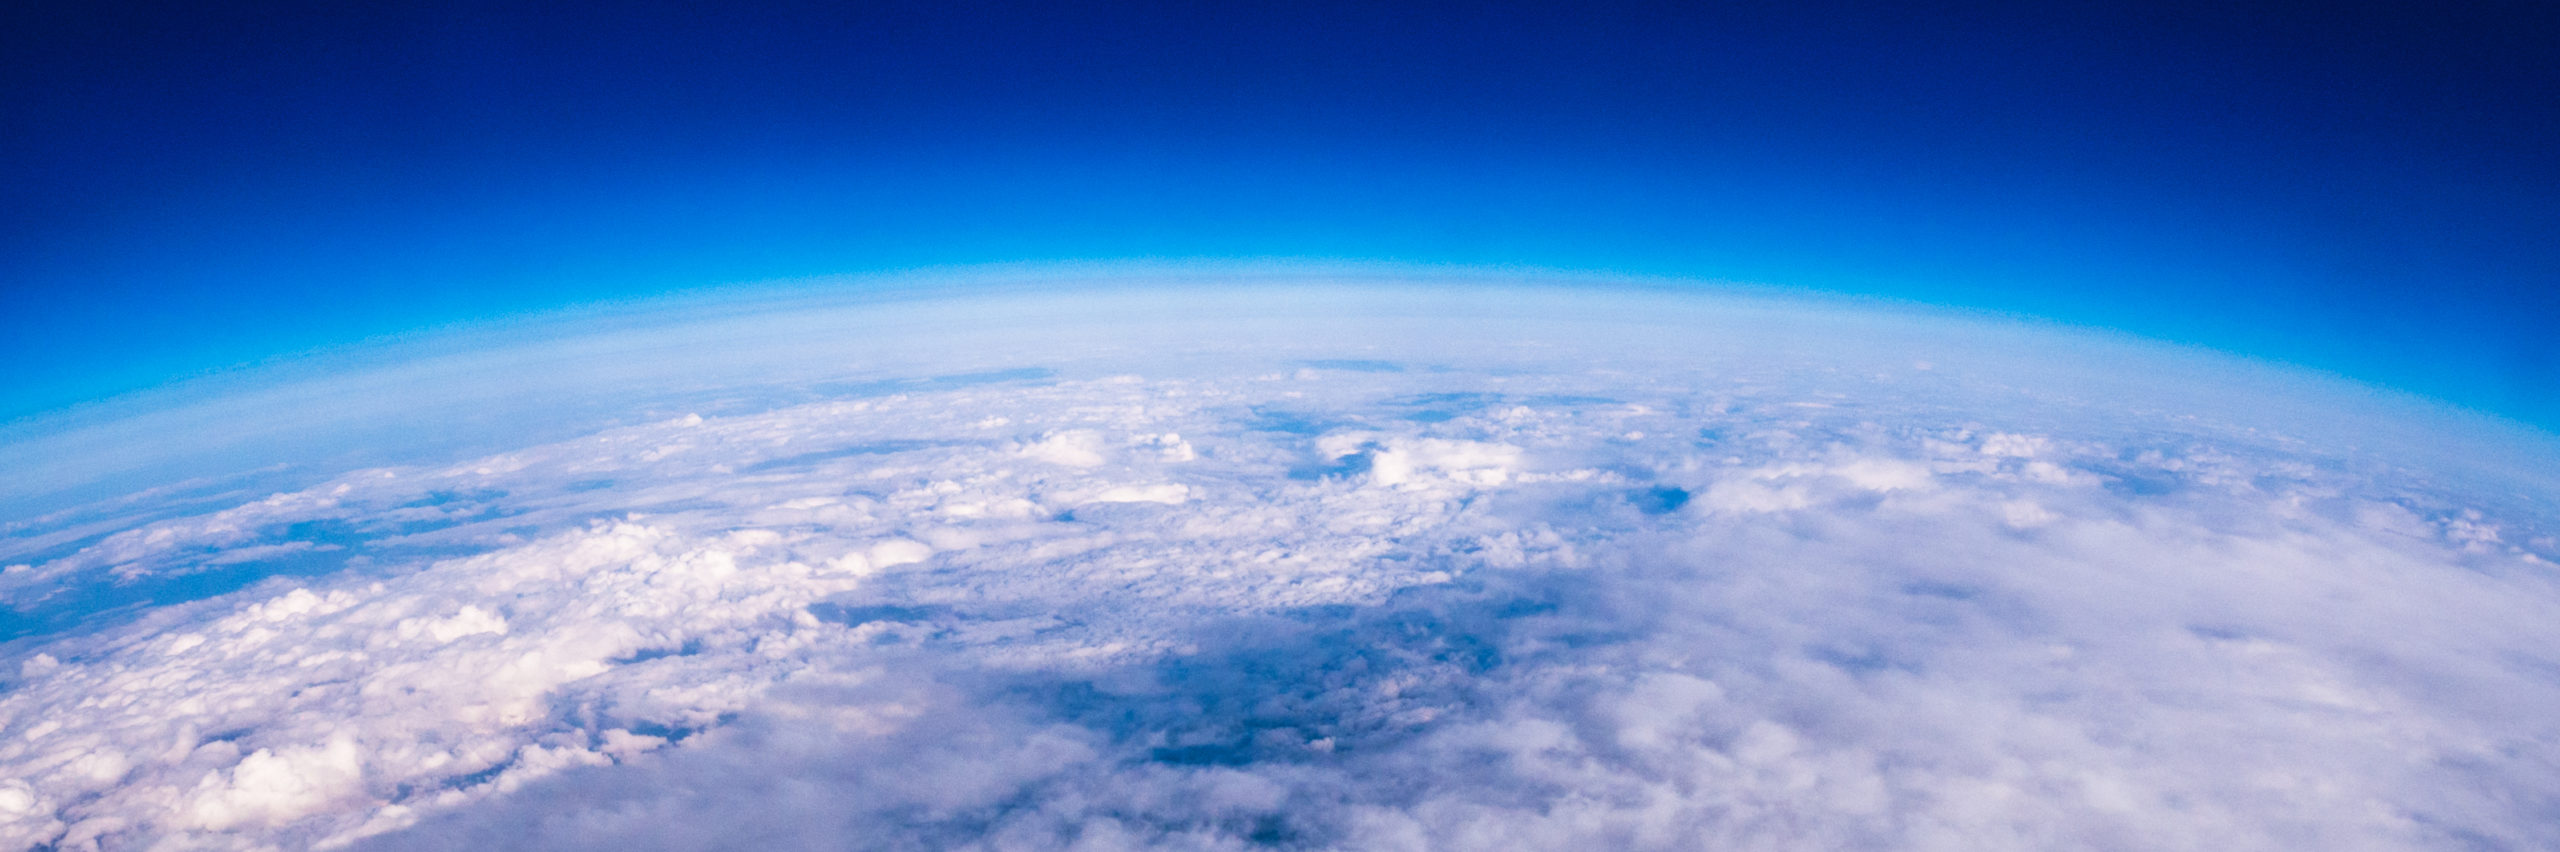 Amazing view of edge of earth and atmosphere layer - Image